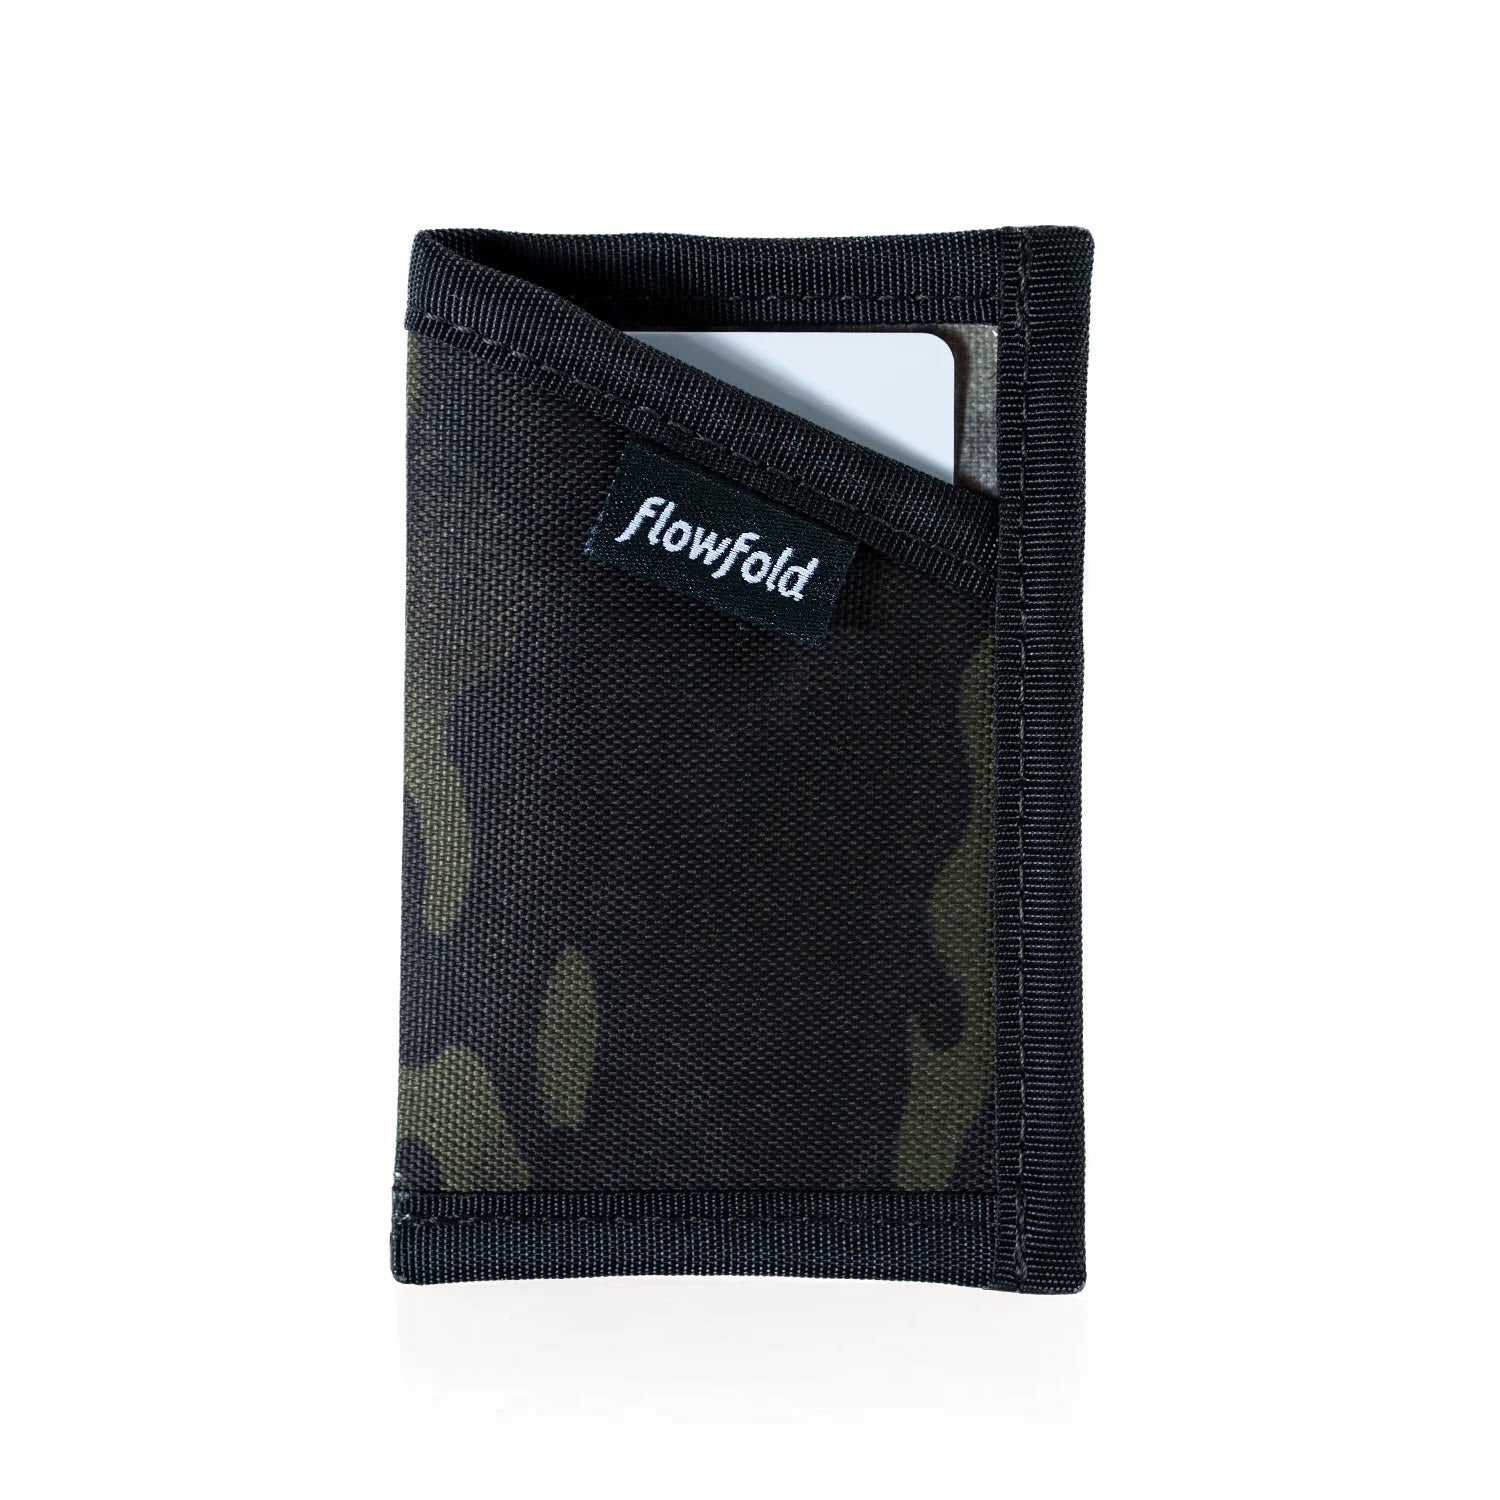 A black Flowfold Minimalist Camo wallet with a camo pattern peeking from inside, displayed against a white background.